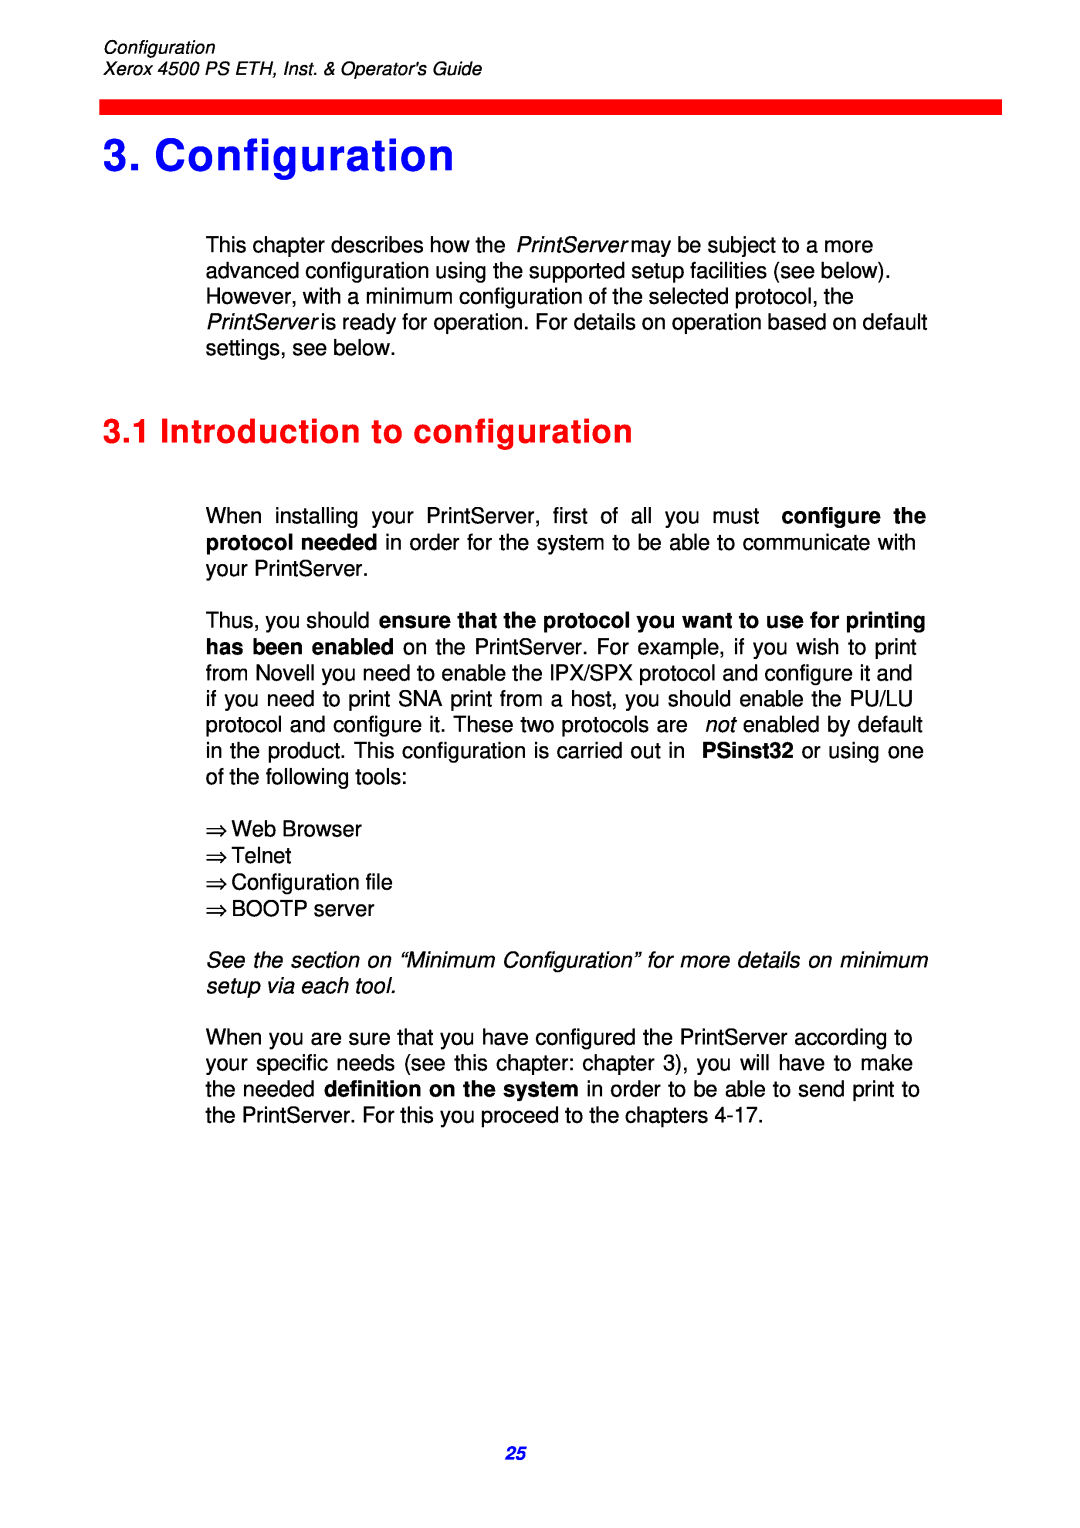 Xerox 4500 ps eth instruction manual Configuration, Introduction to configuration 